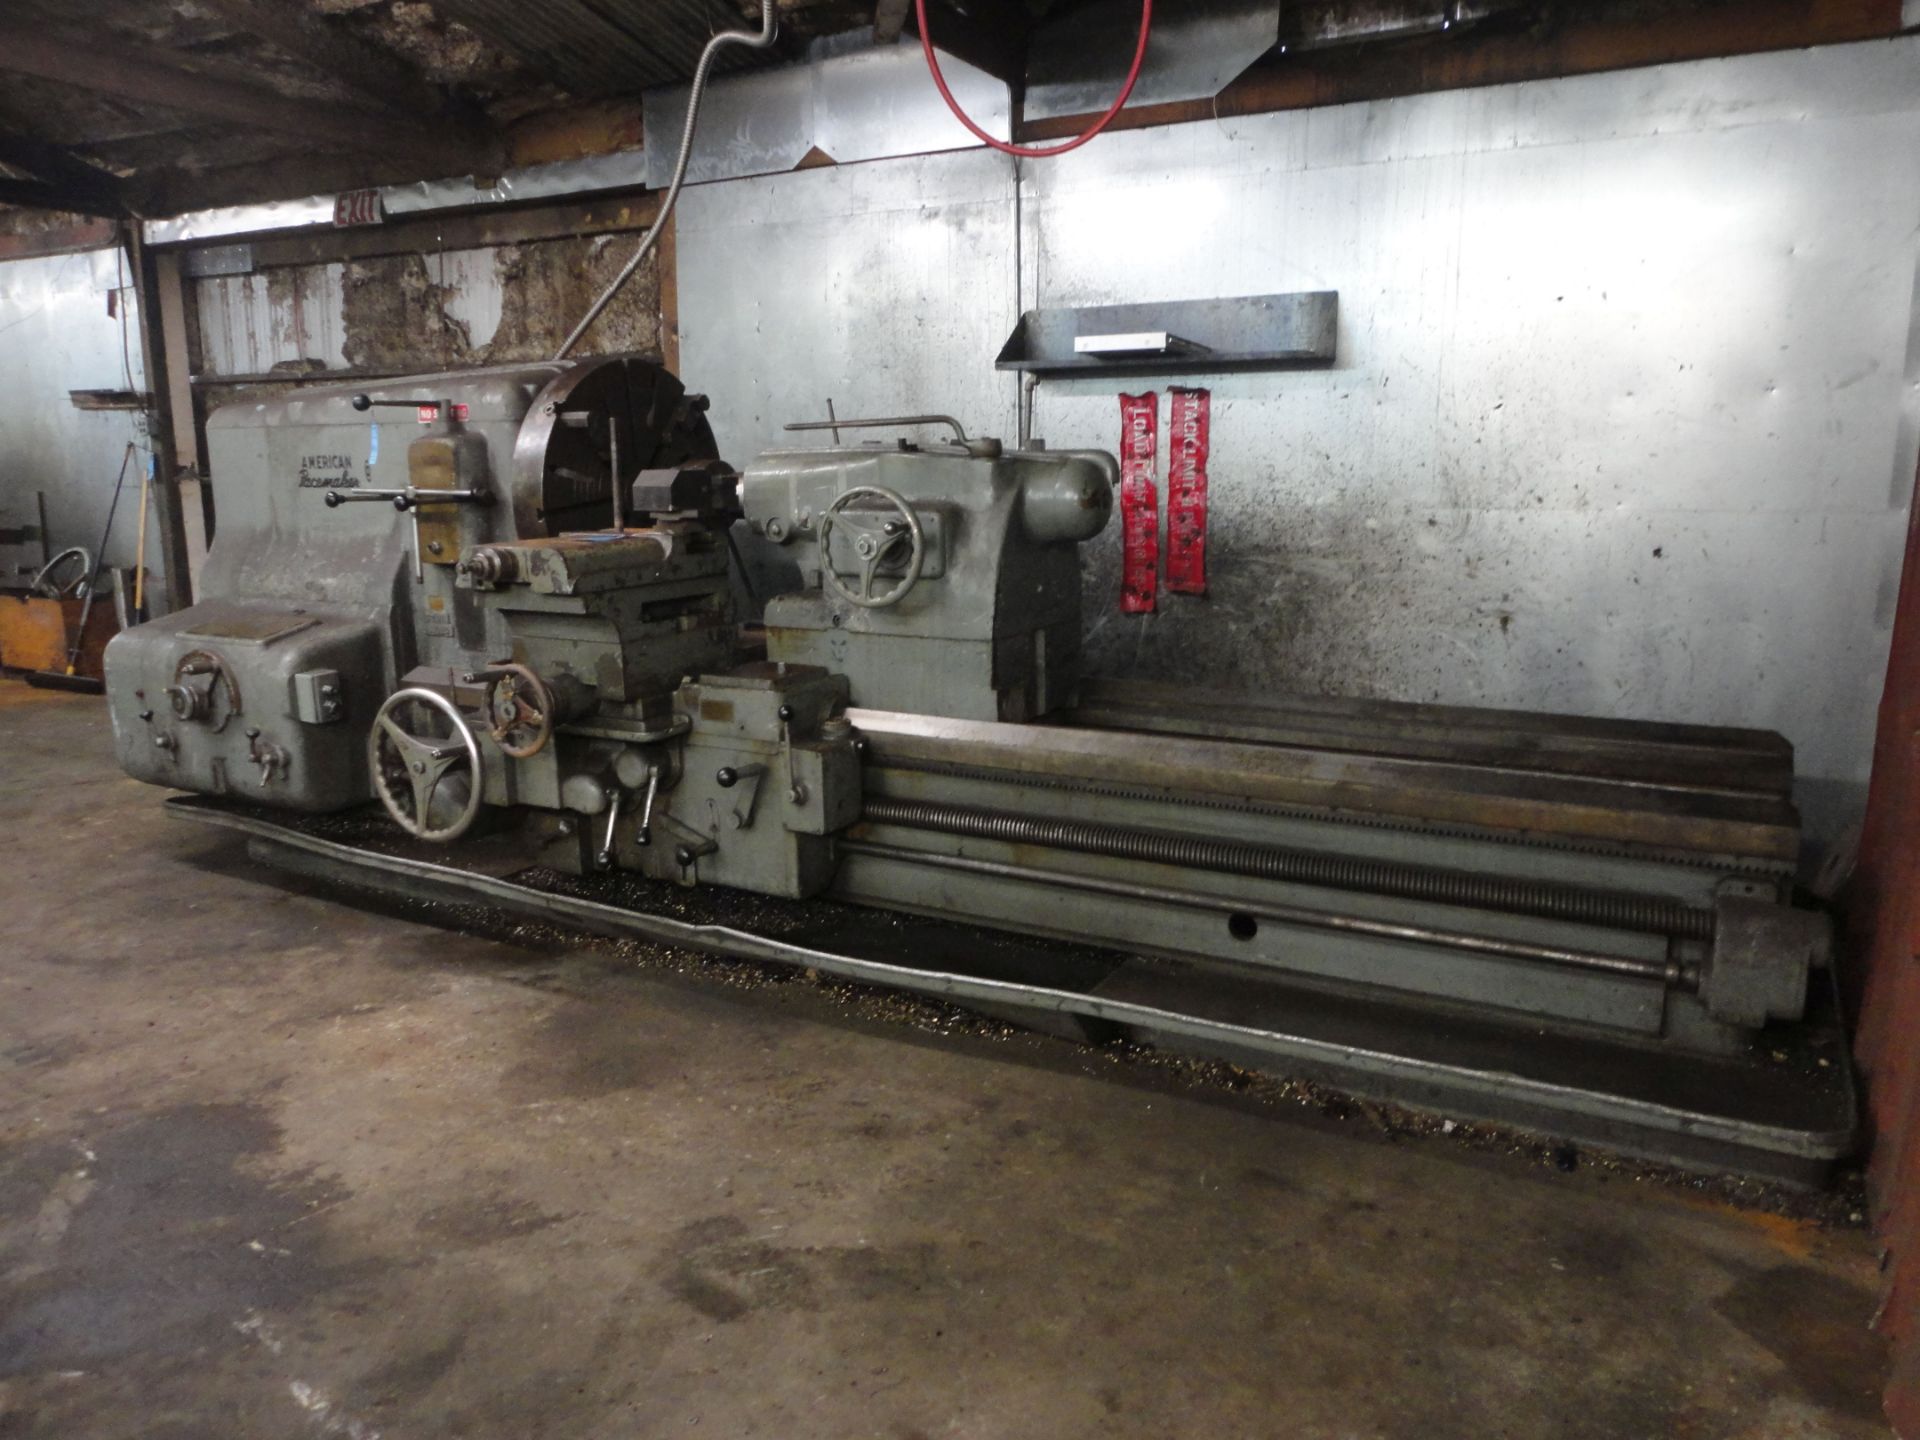 46" X 84" AMERICAN PACEMAKER ENGINE LATHE; S/N N/A, 46" SWING OVER BED, 30" SWING OVER CROSS - Image 2 of 10